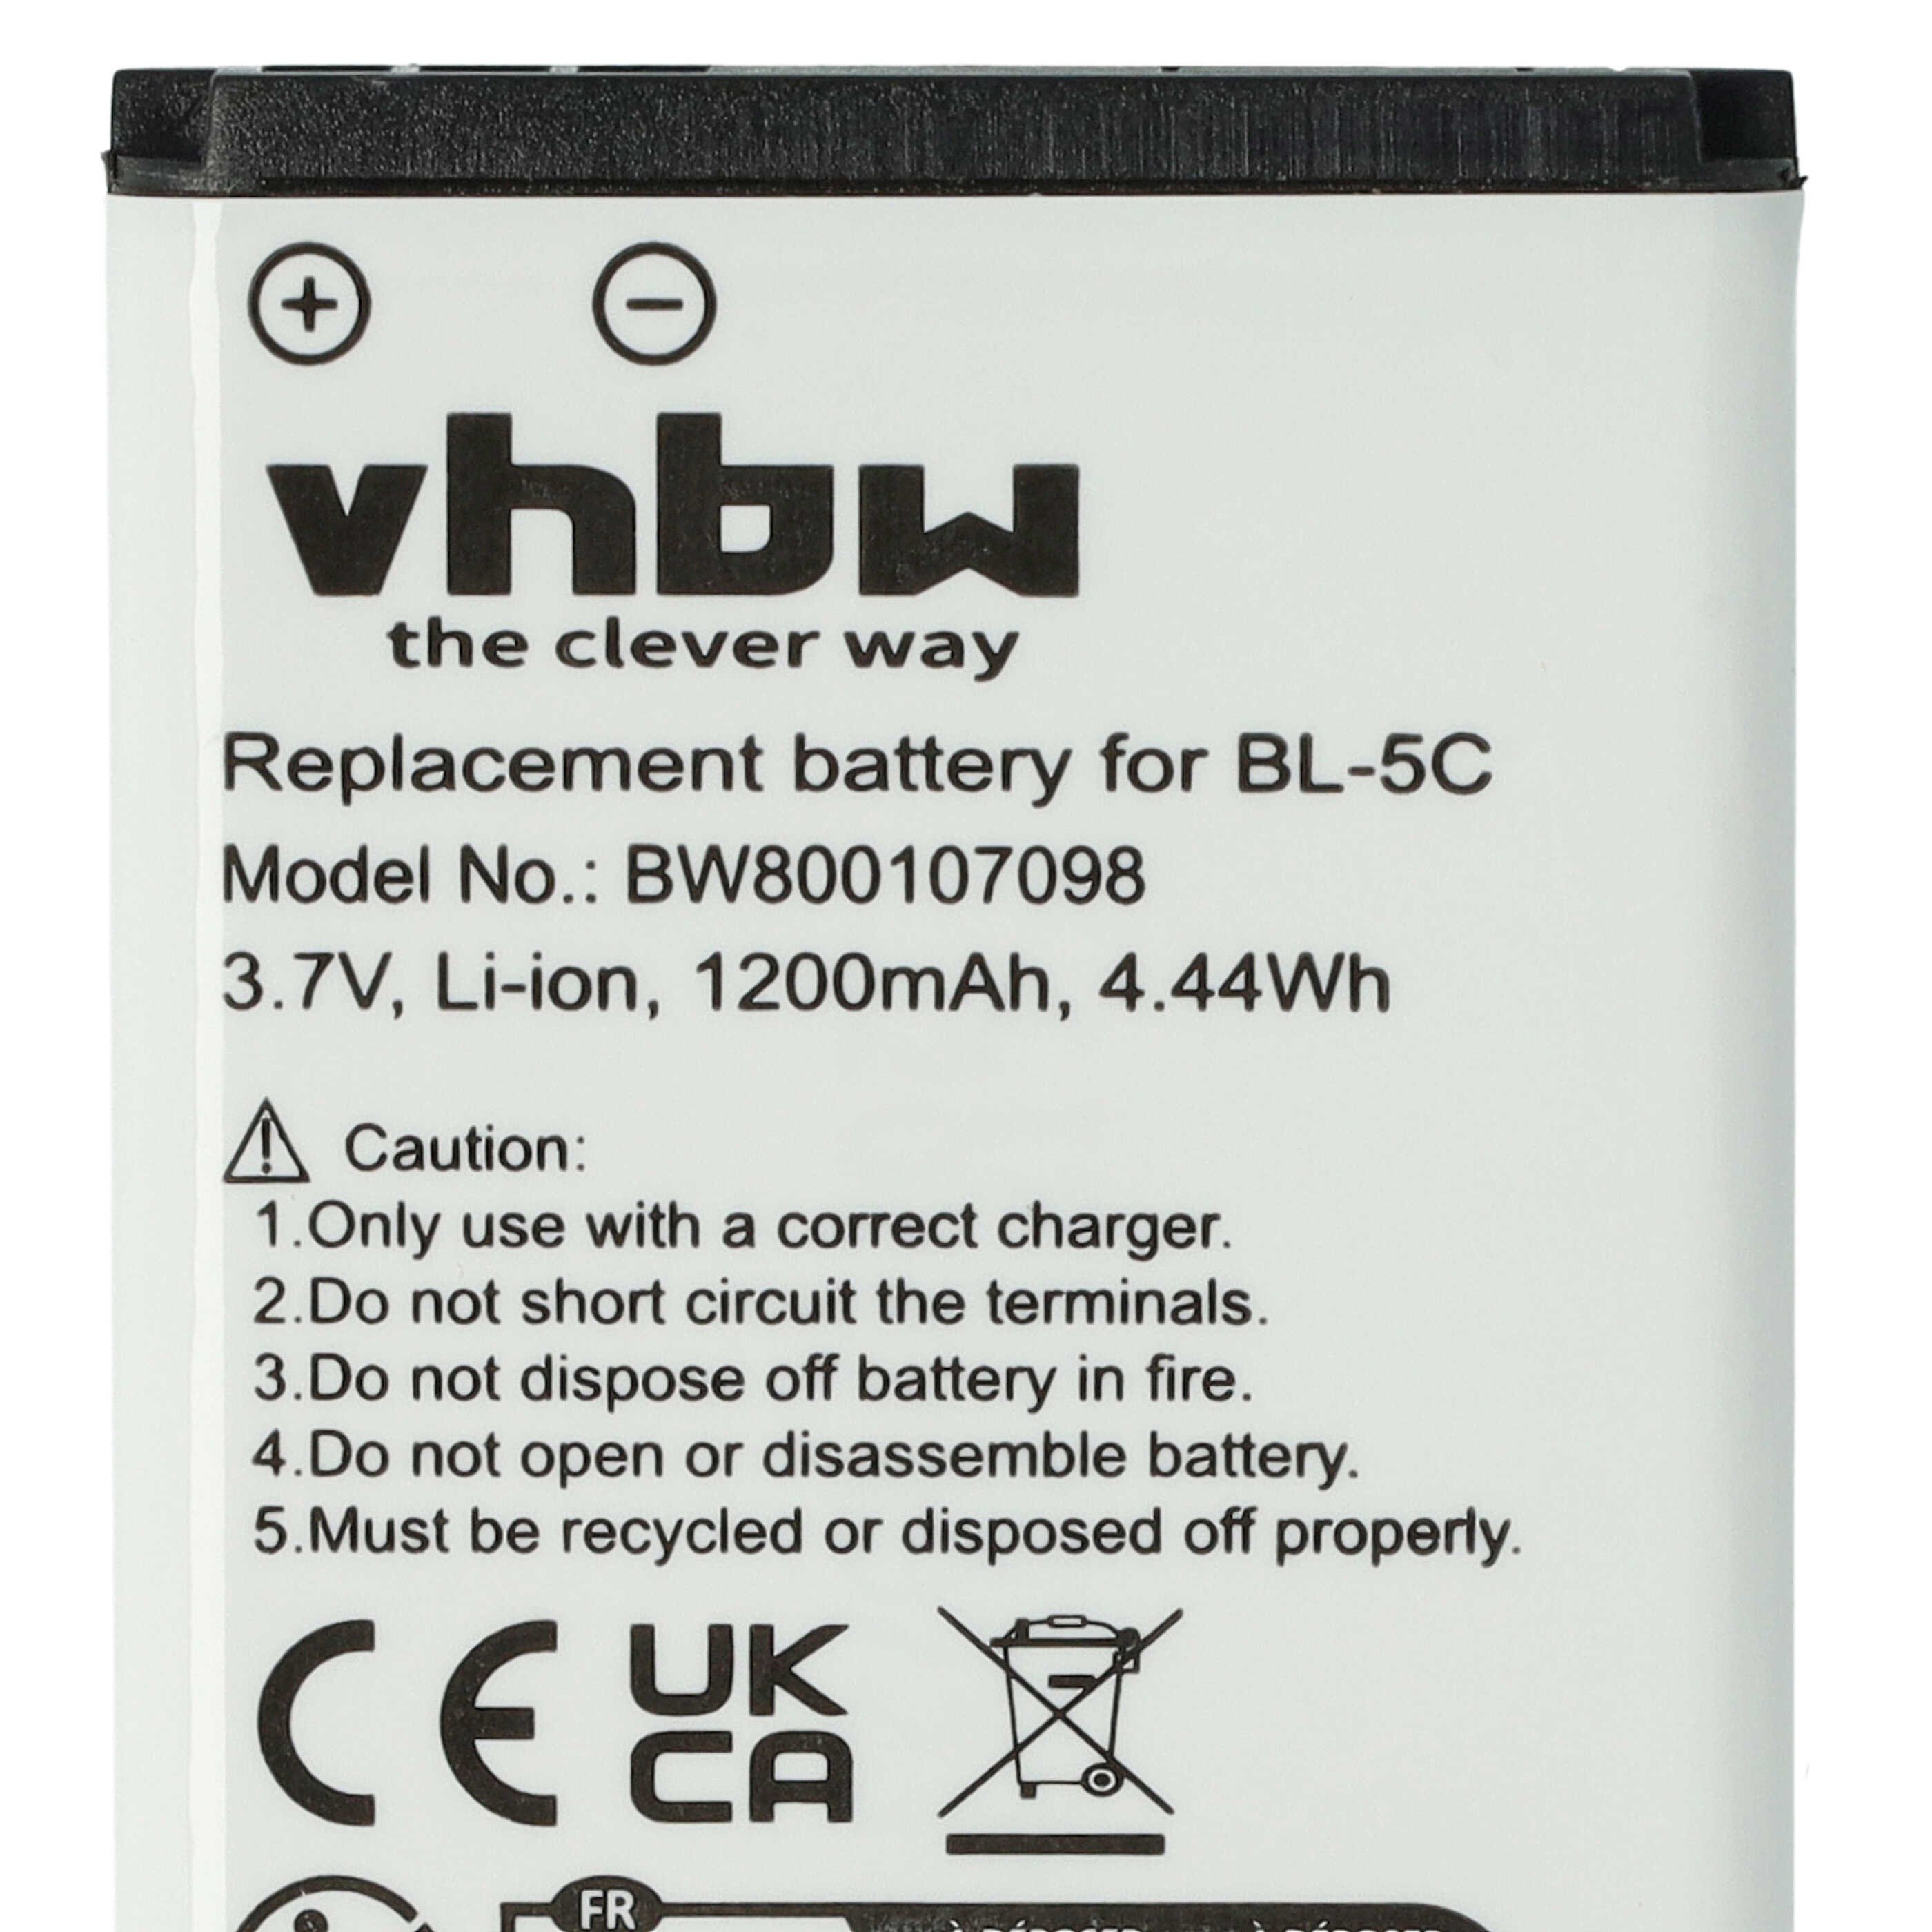 Mobile Phone Battery Replacement for MMDR 12 - 1200mAh 3.7V Li-Ion